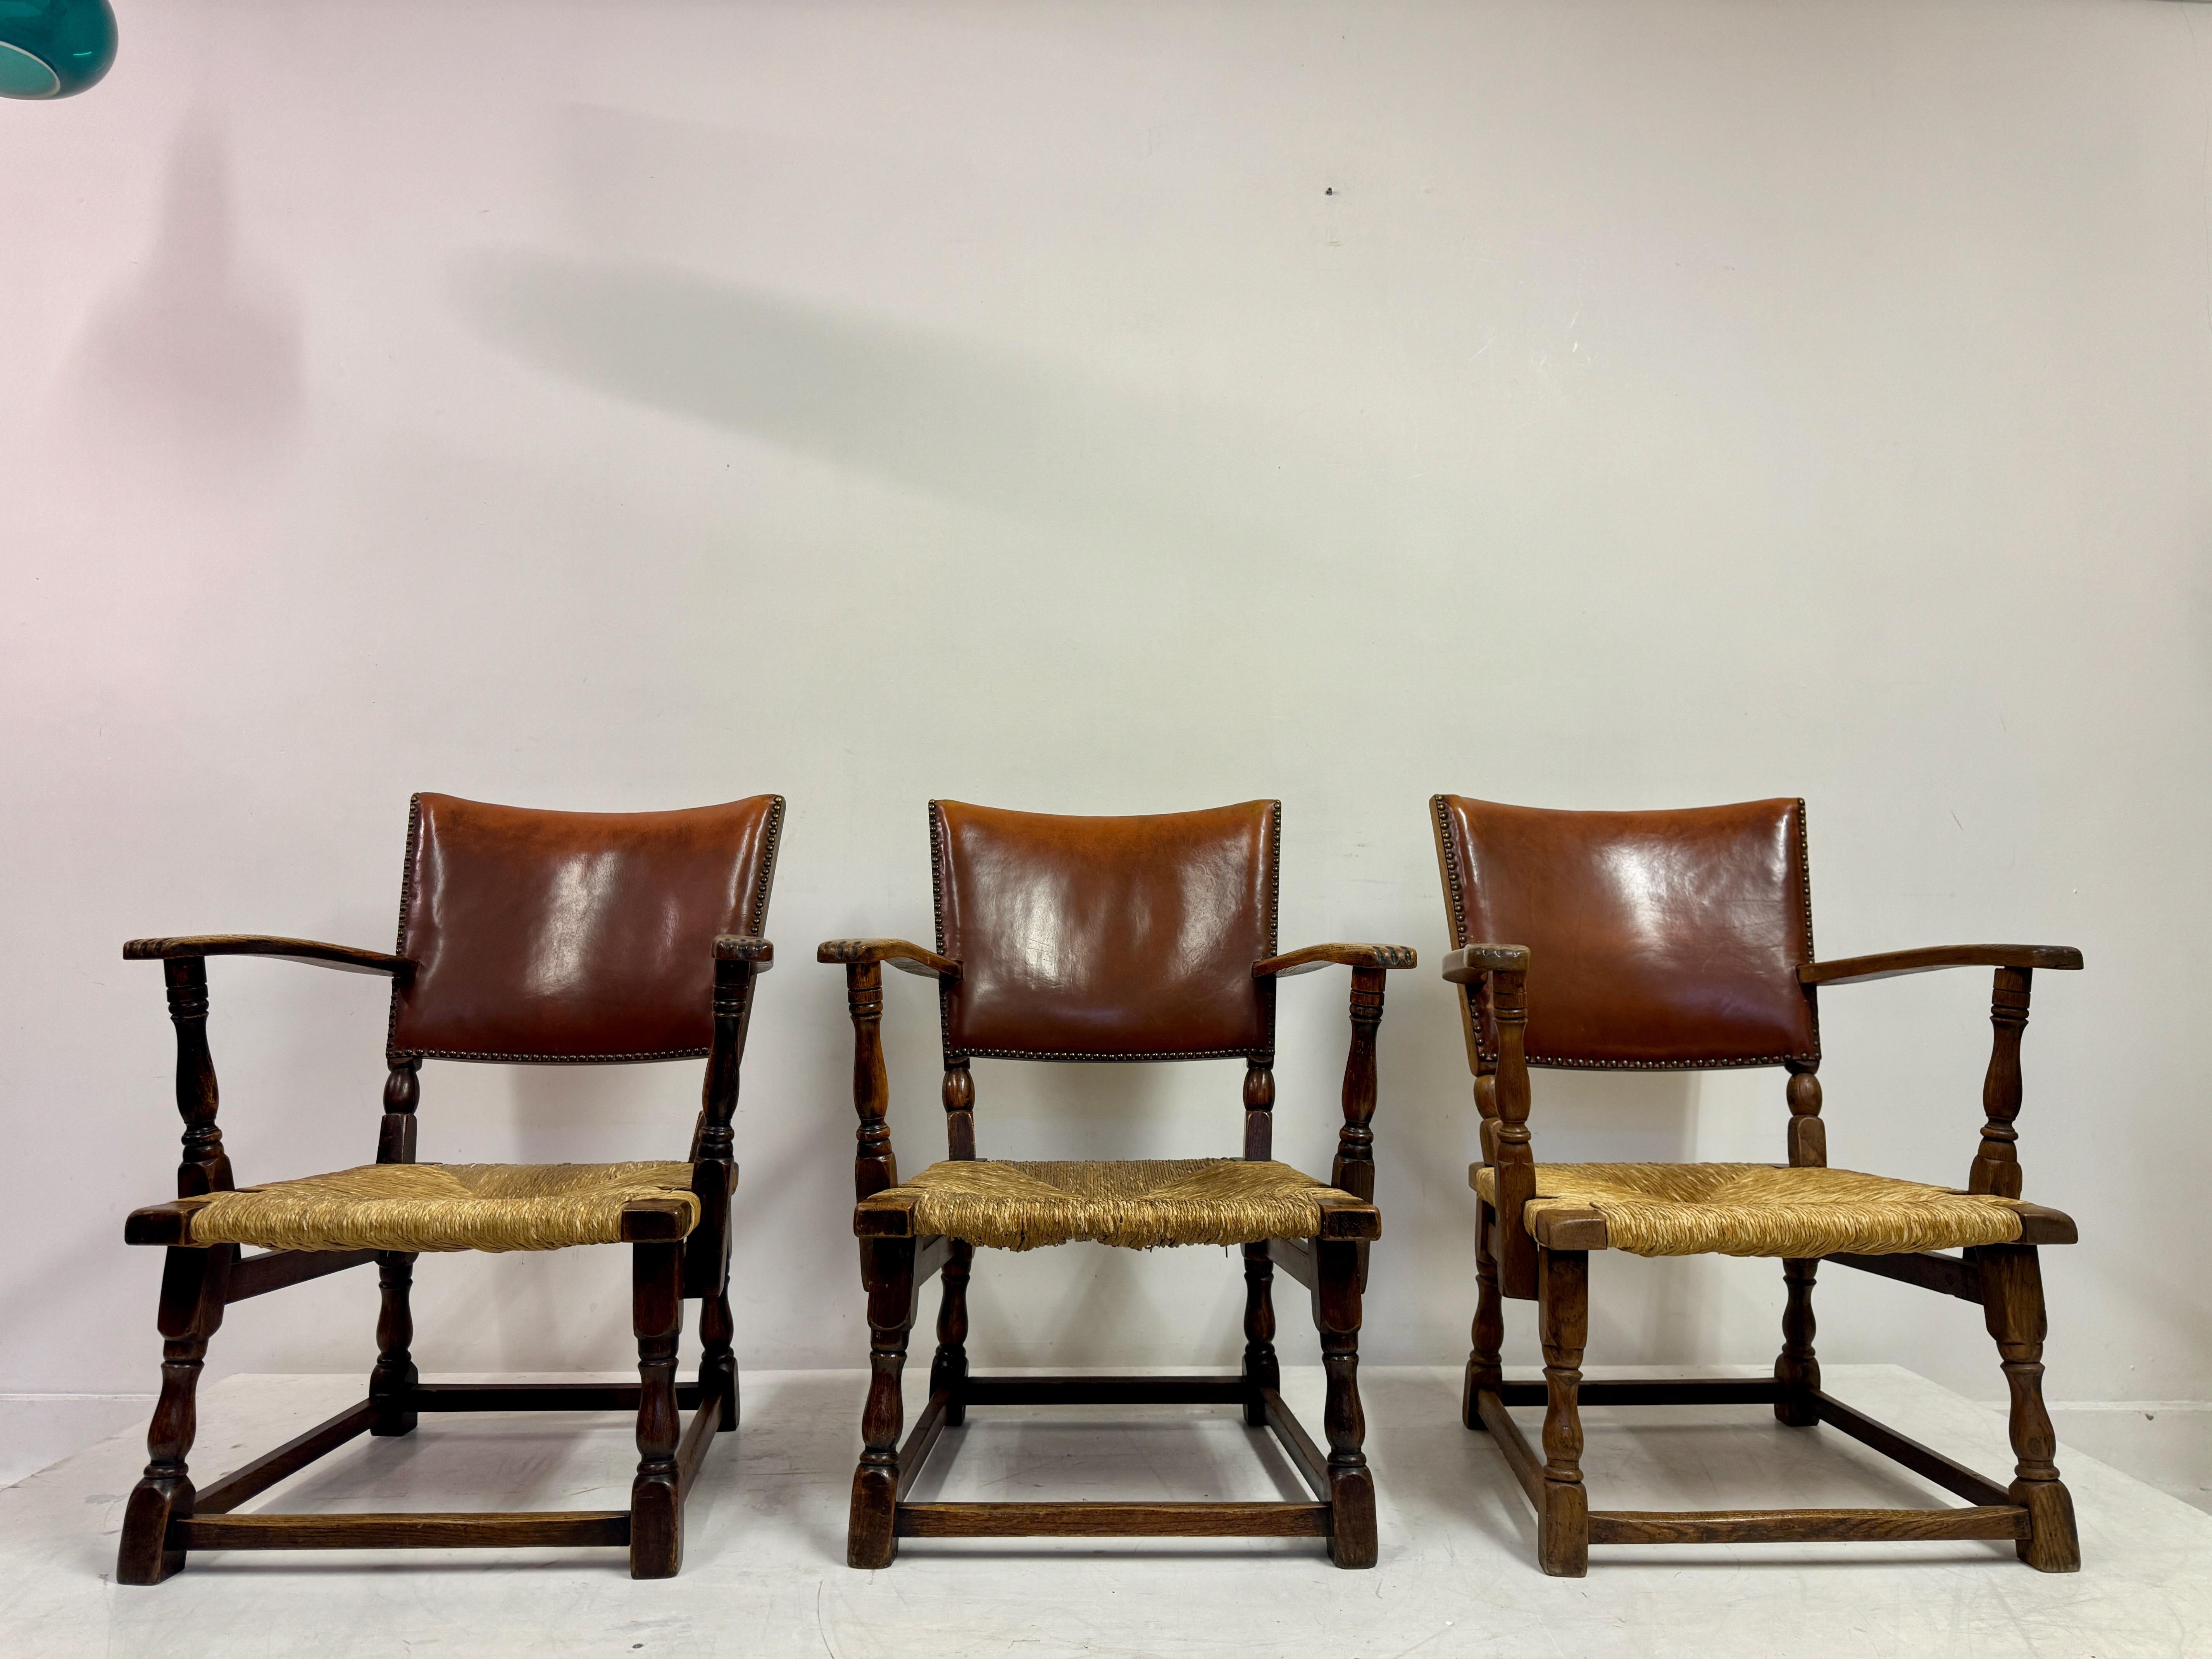 Three armchairs

Oak

Rush seat with leather back

Seat height 36cm

Dutch 1940s